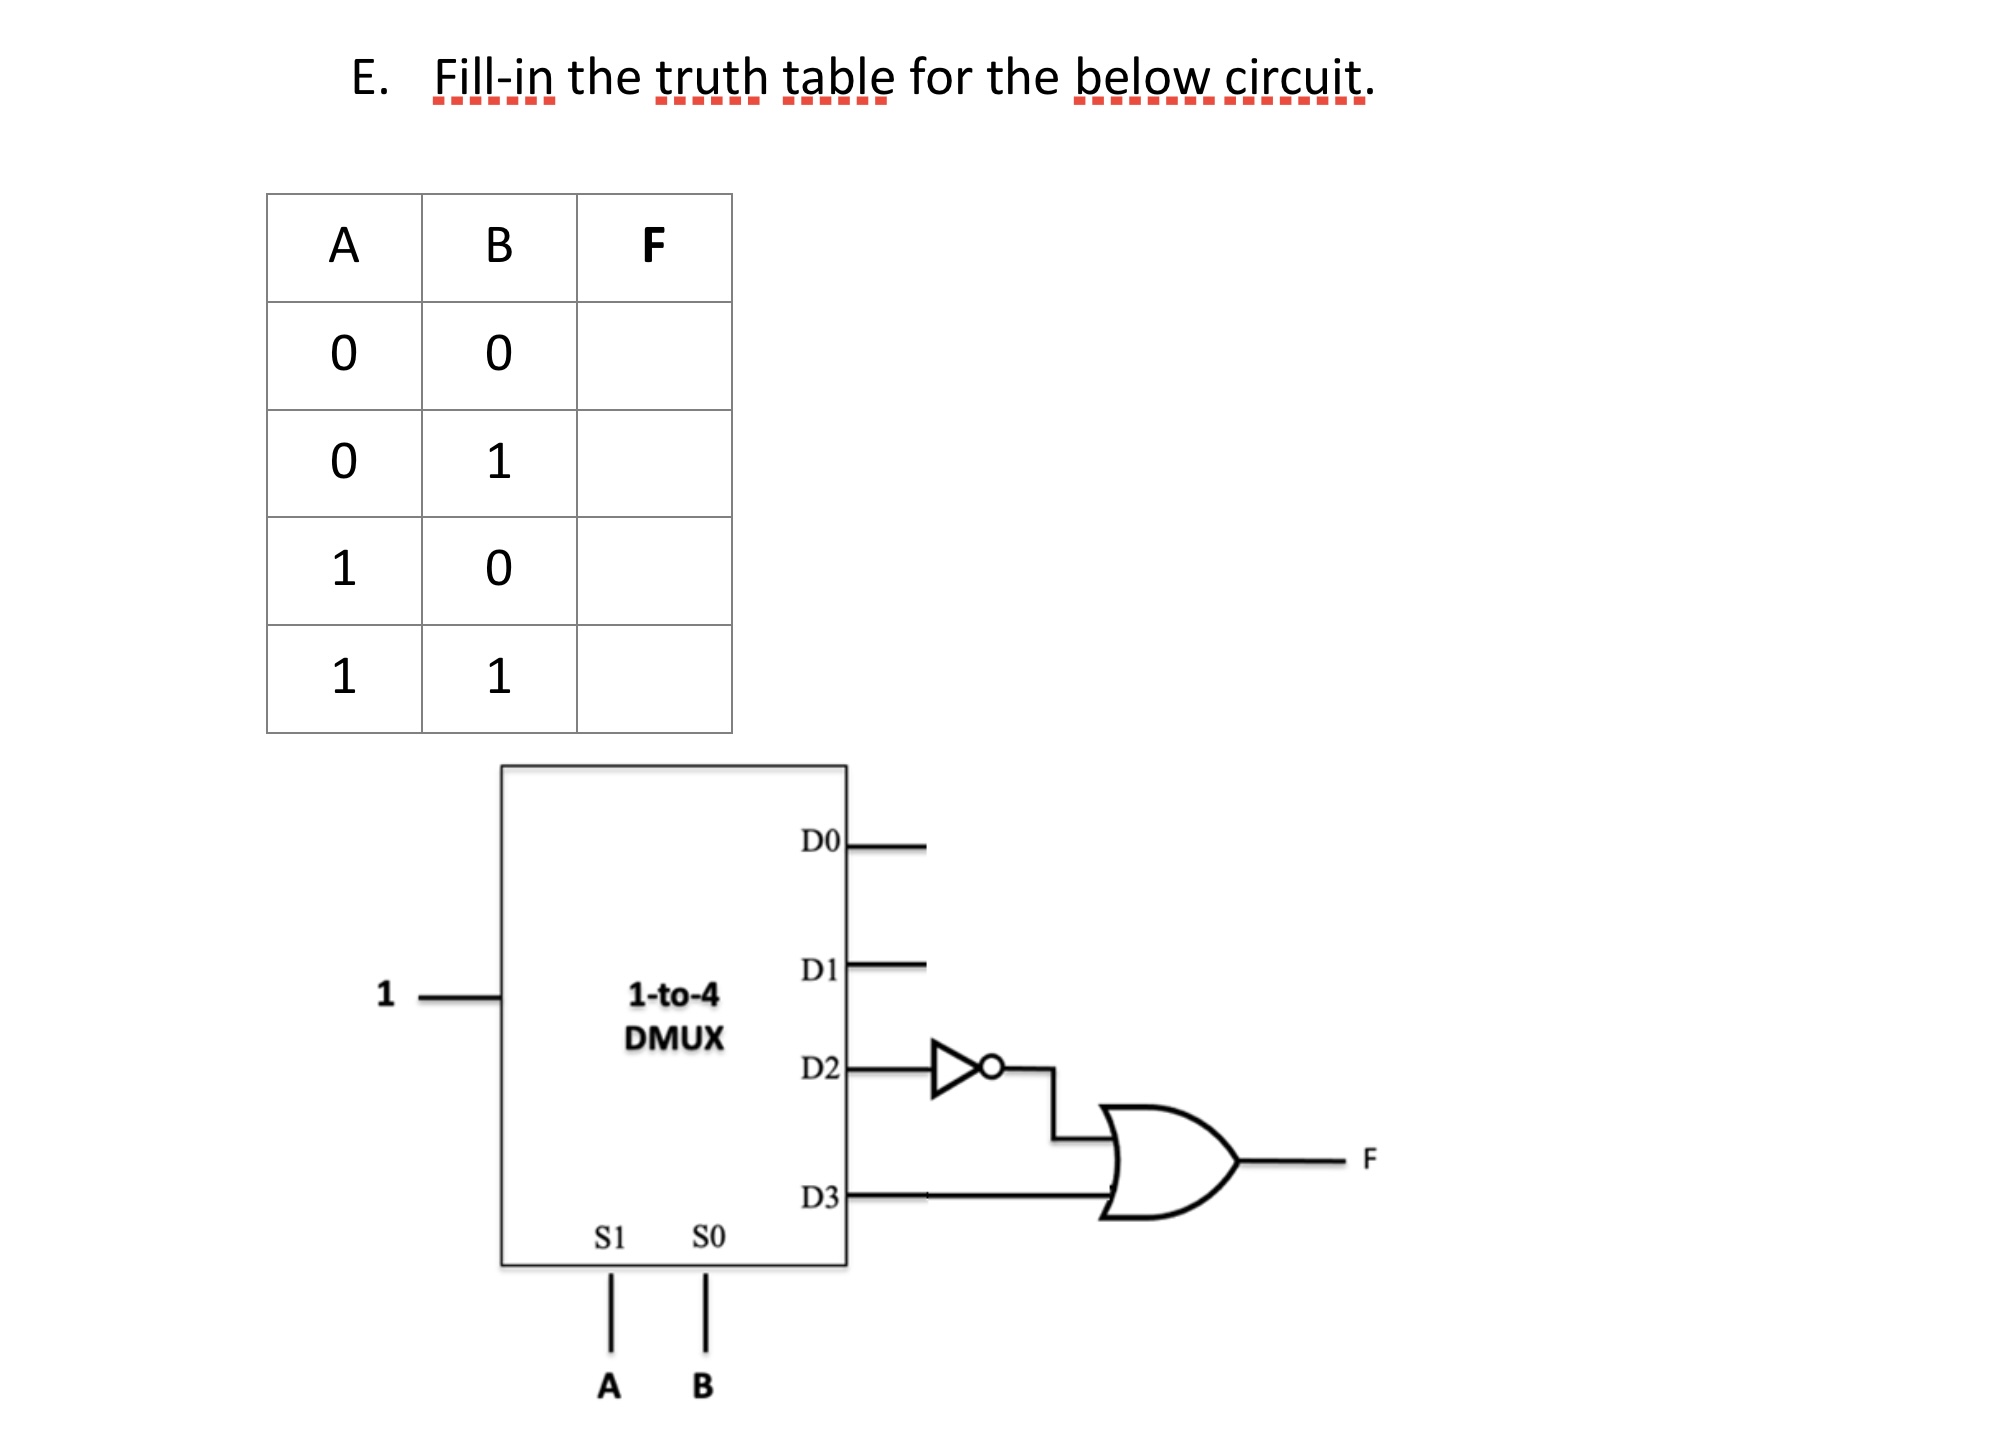 E. A 0 0 1 1 Fill-in the truth table for the below circuit.    B 0 1 0 1 F 1-to-4 DMUX S1 SO | A B DO D1 D2